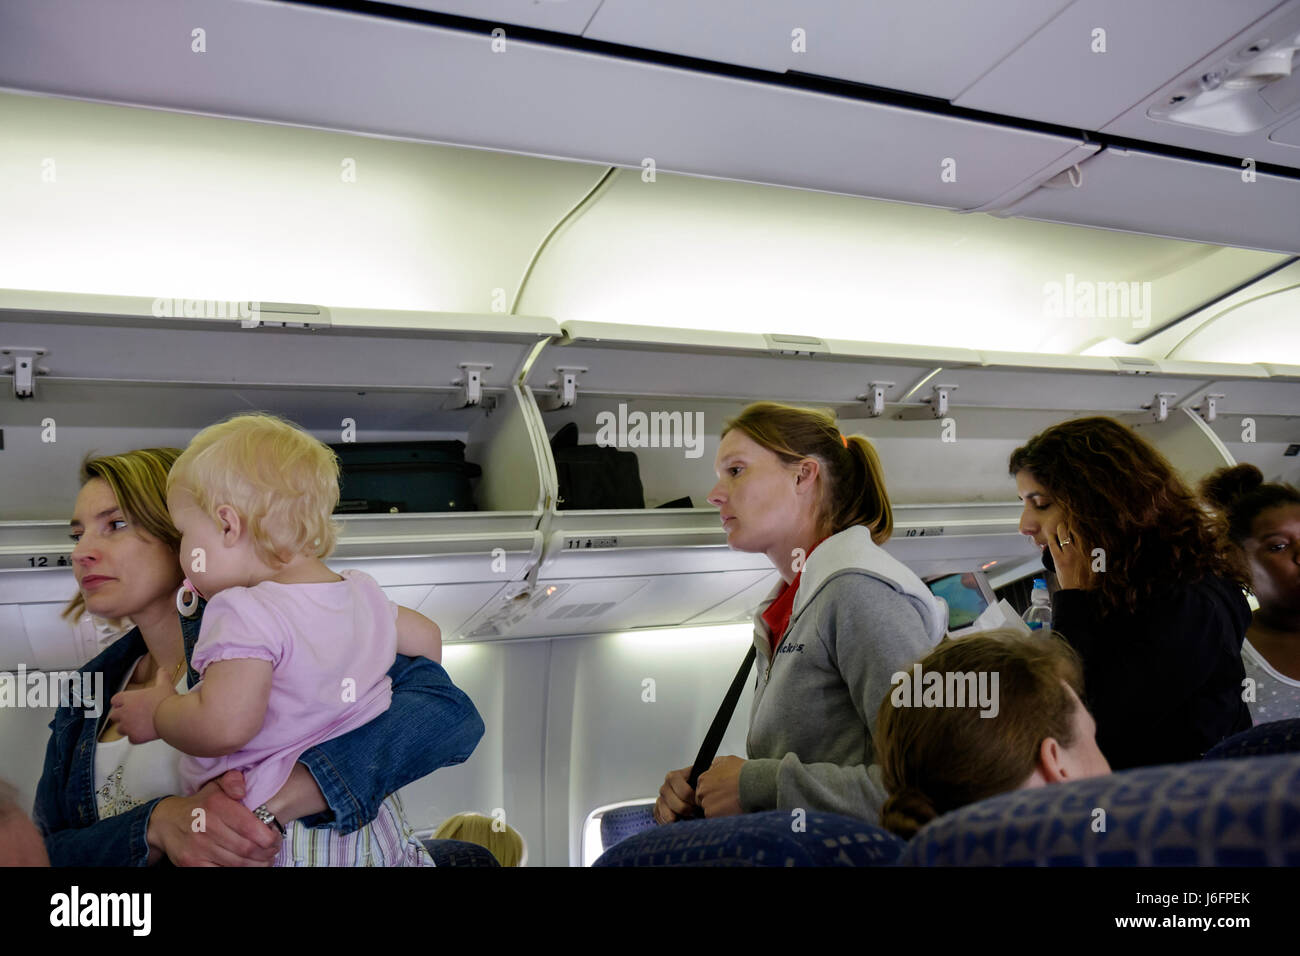 Atlanta Georgia,Hartsfield Jackson Atlanta International Airport,Delta Airlines,woman carries baby babies,women,girl girls,youngster youngsters youth Stock Photo